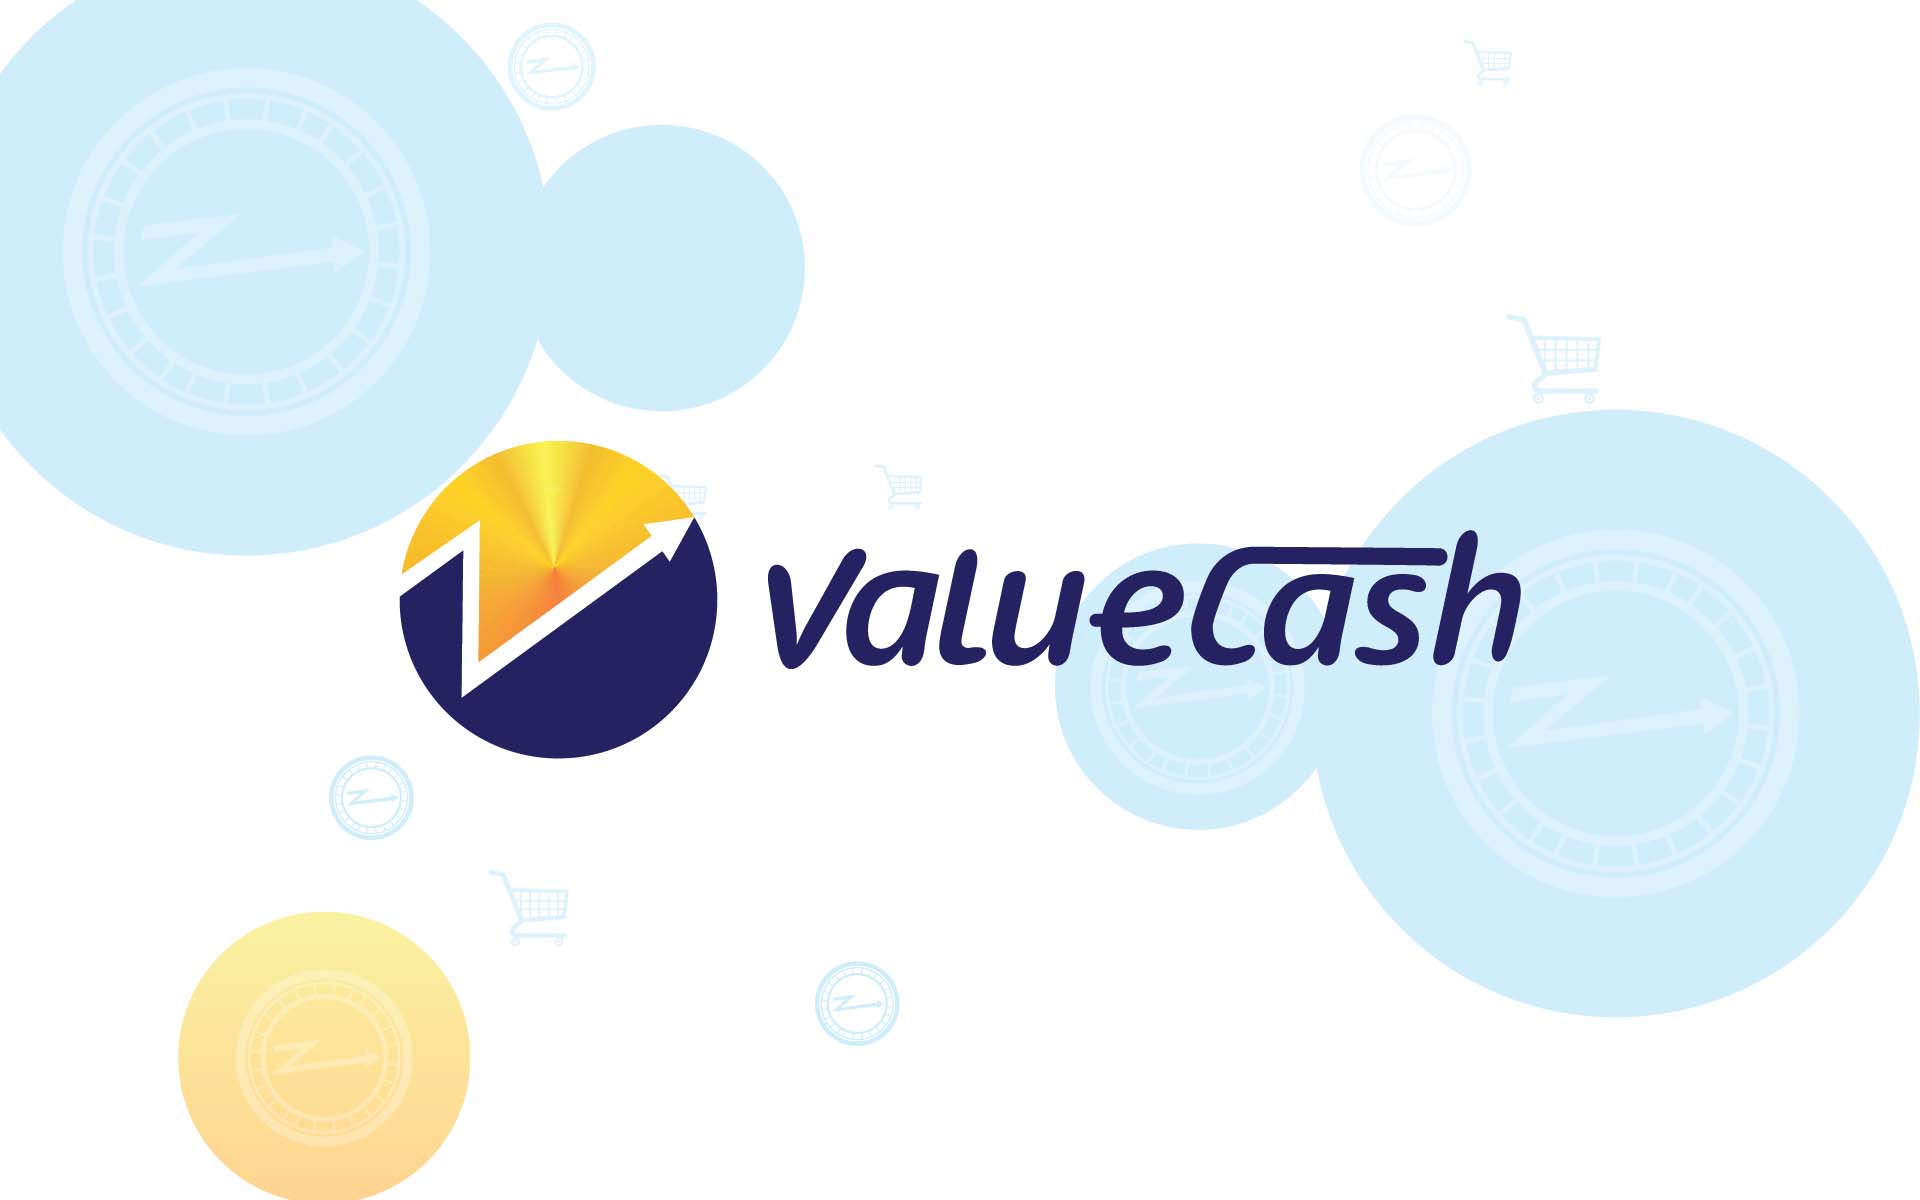 ValueCash Launches ICO Backed By Decentralized & Self-Governing Blockchain That Allows Users To Earn Tokens While Using Crypto To Pay For Goods & Services